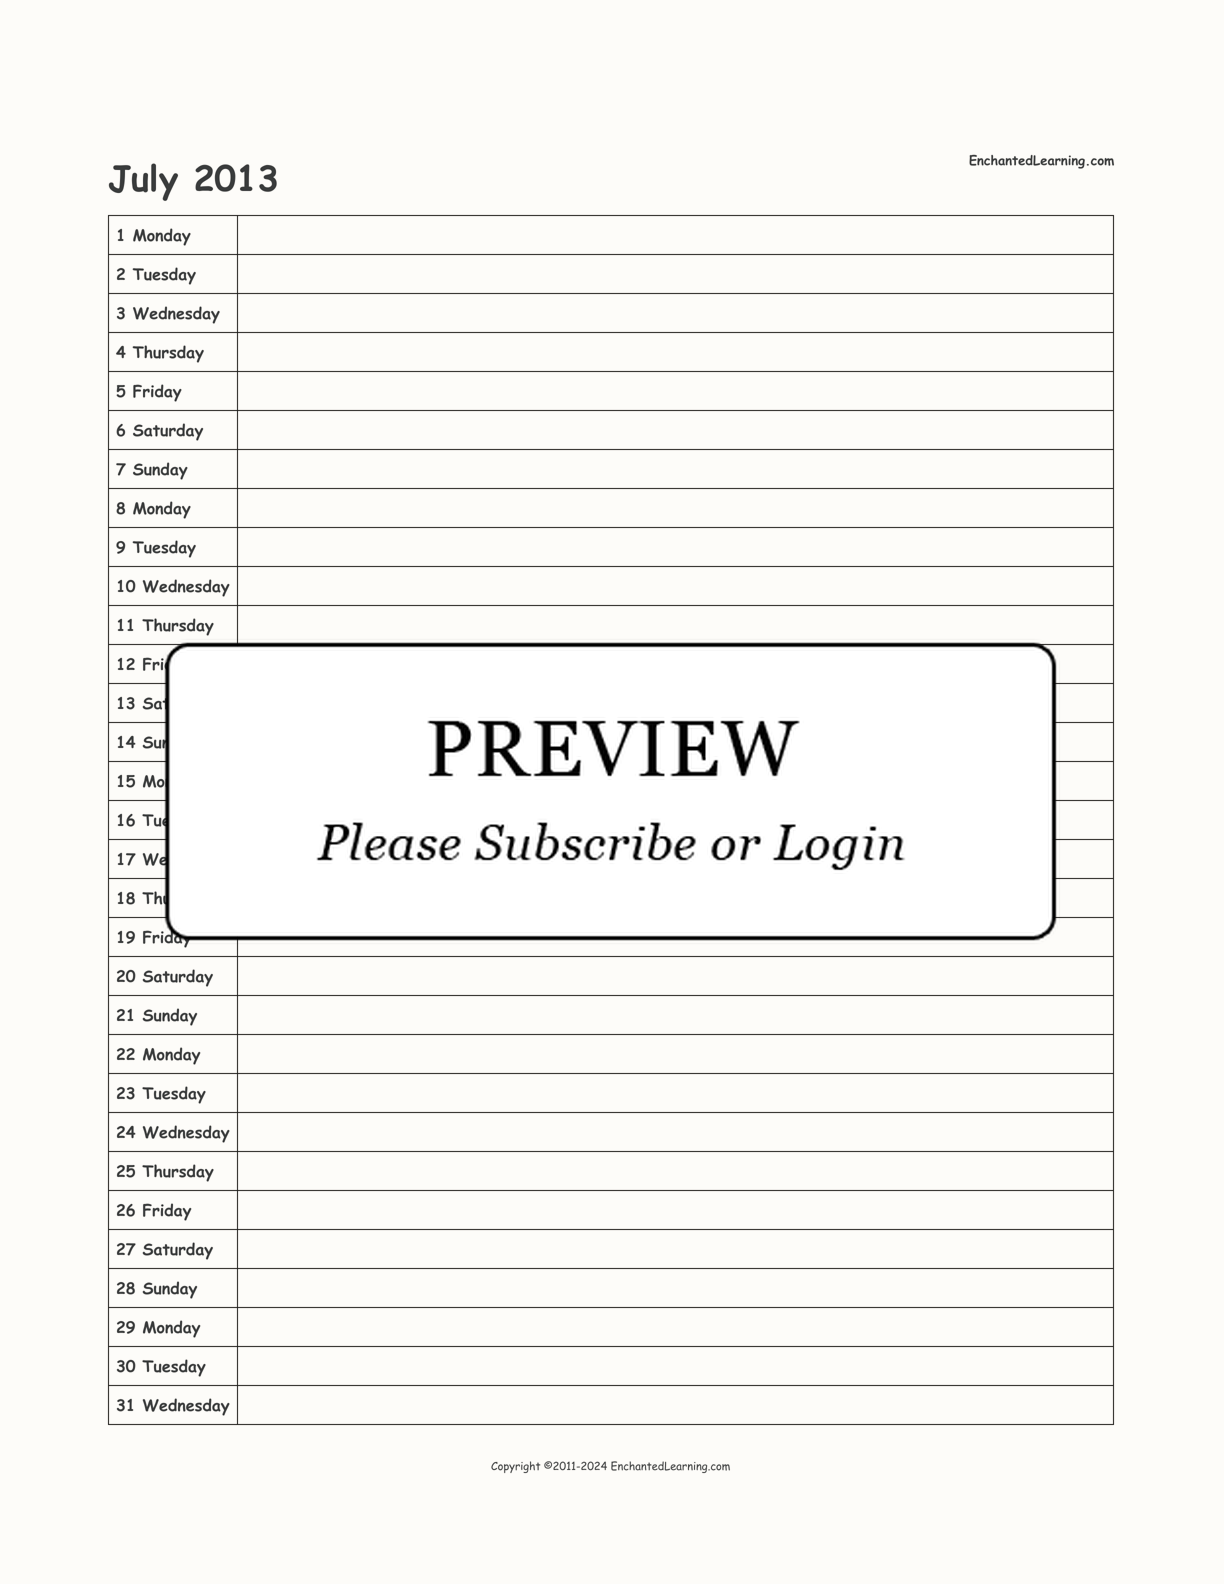 2013 Scheduling Calendar interactive printout page 7